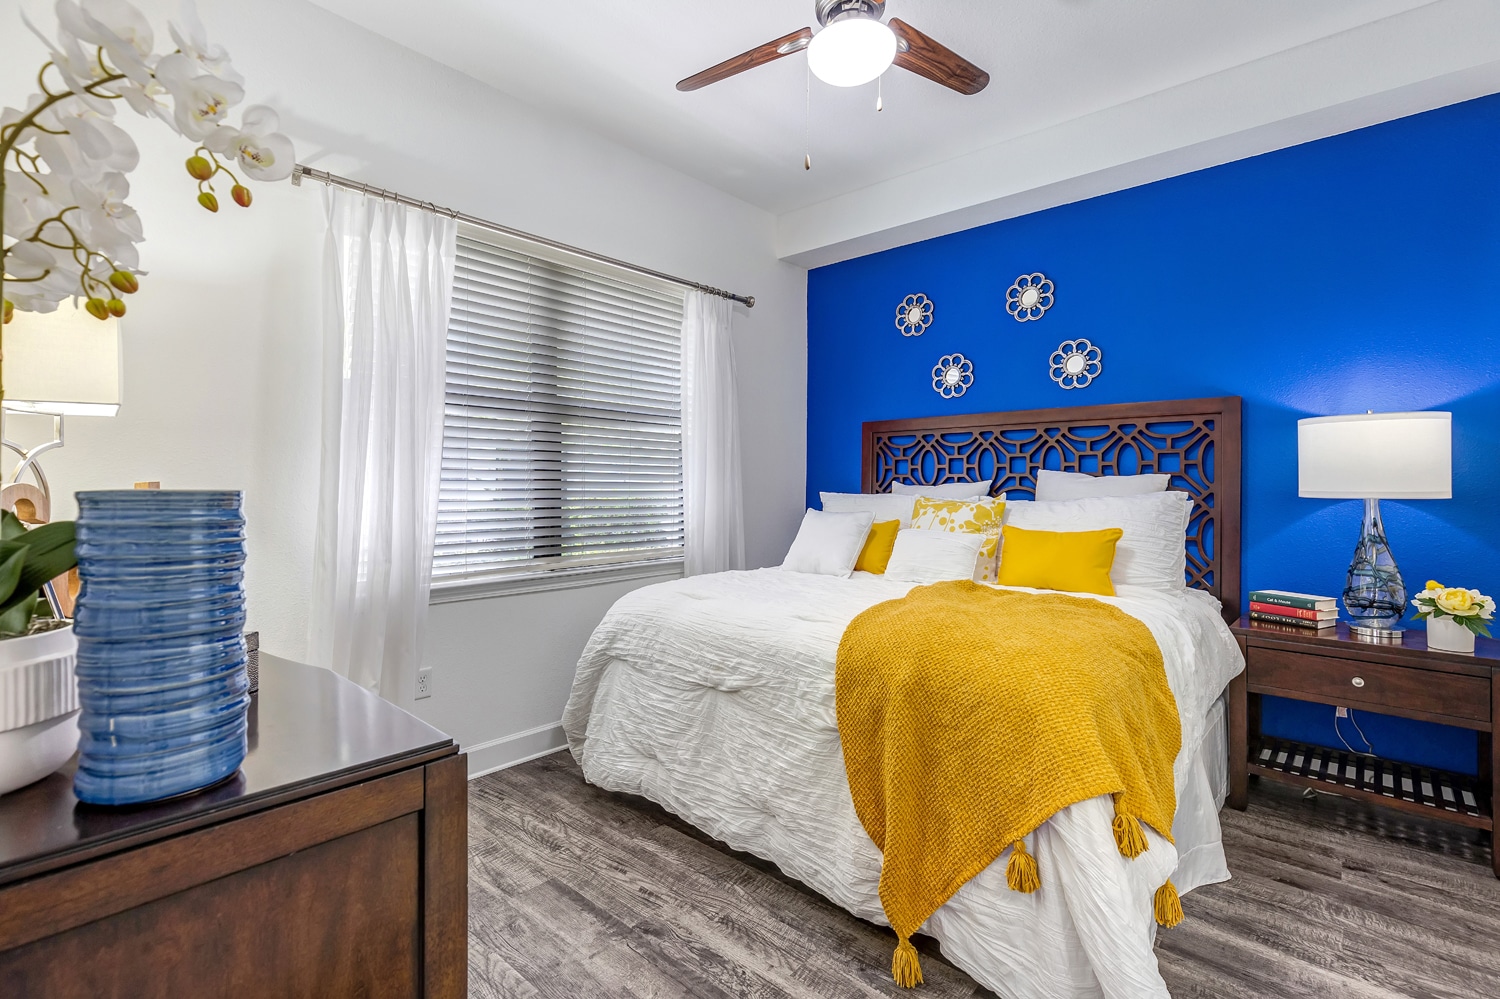 Apartments in Miramar A bedroom with blue walls and white furniture. Miramar Park Apartments